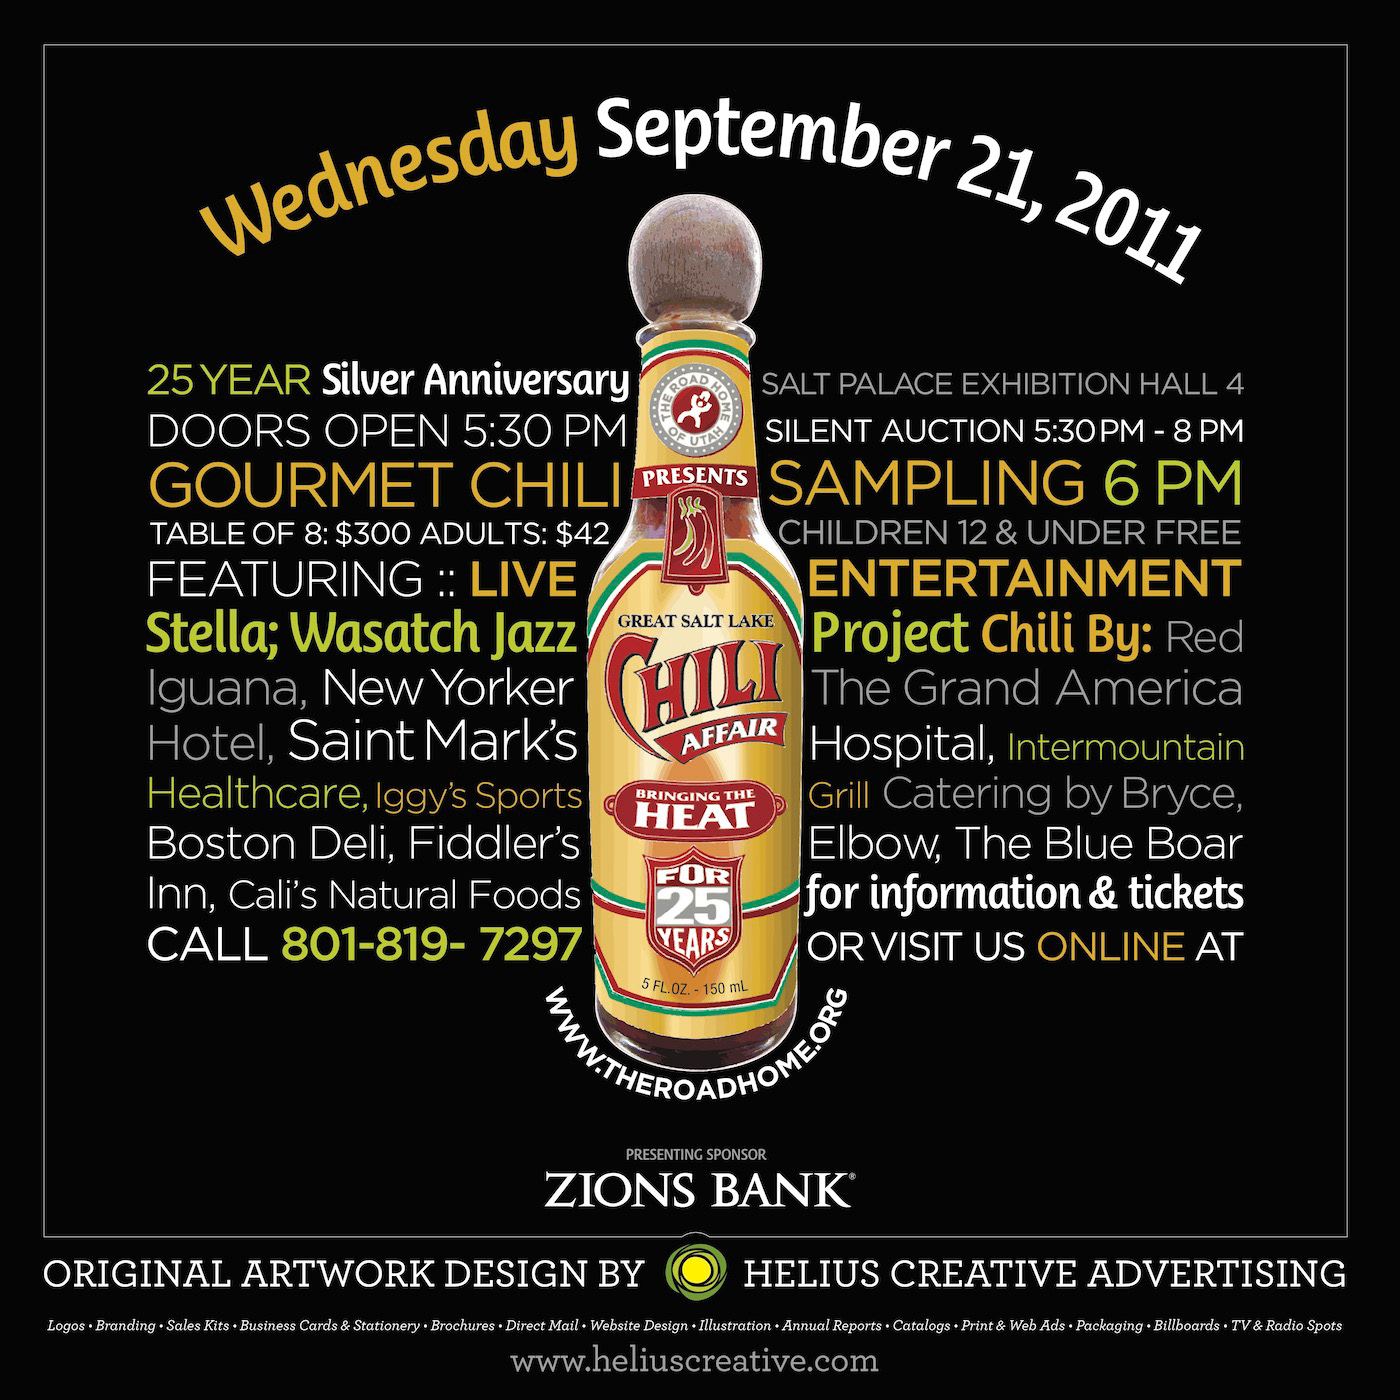 chili sauce Hot meat beans hispanic latino special Event anniversary ANNUAL Promotion live Entertainment bottle Icon insignia symbol crest Logotype logo graphic design marketing   spicy sauced drunk drink alcohol band restaurant chef top executive sexy volunteer charity kids families family years stamp bus Kiosk POD piblic environmental Outdoor graphics downtown banner sign hanging city inner Poverty LOW income golf tee ball towel robe bath beach Entry Form ticket poster news paper newspaper ad envelope andy worhol pop art wallpaper wall iphone screen tall text font sans serif